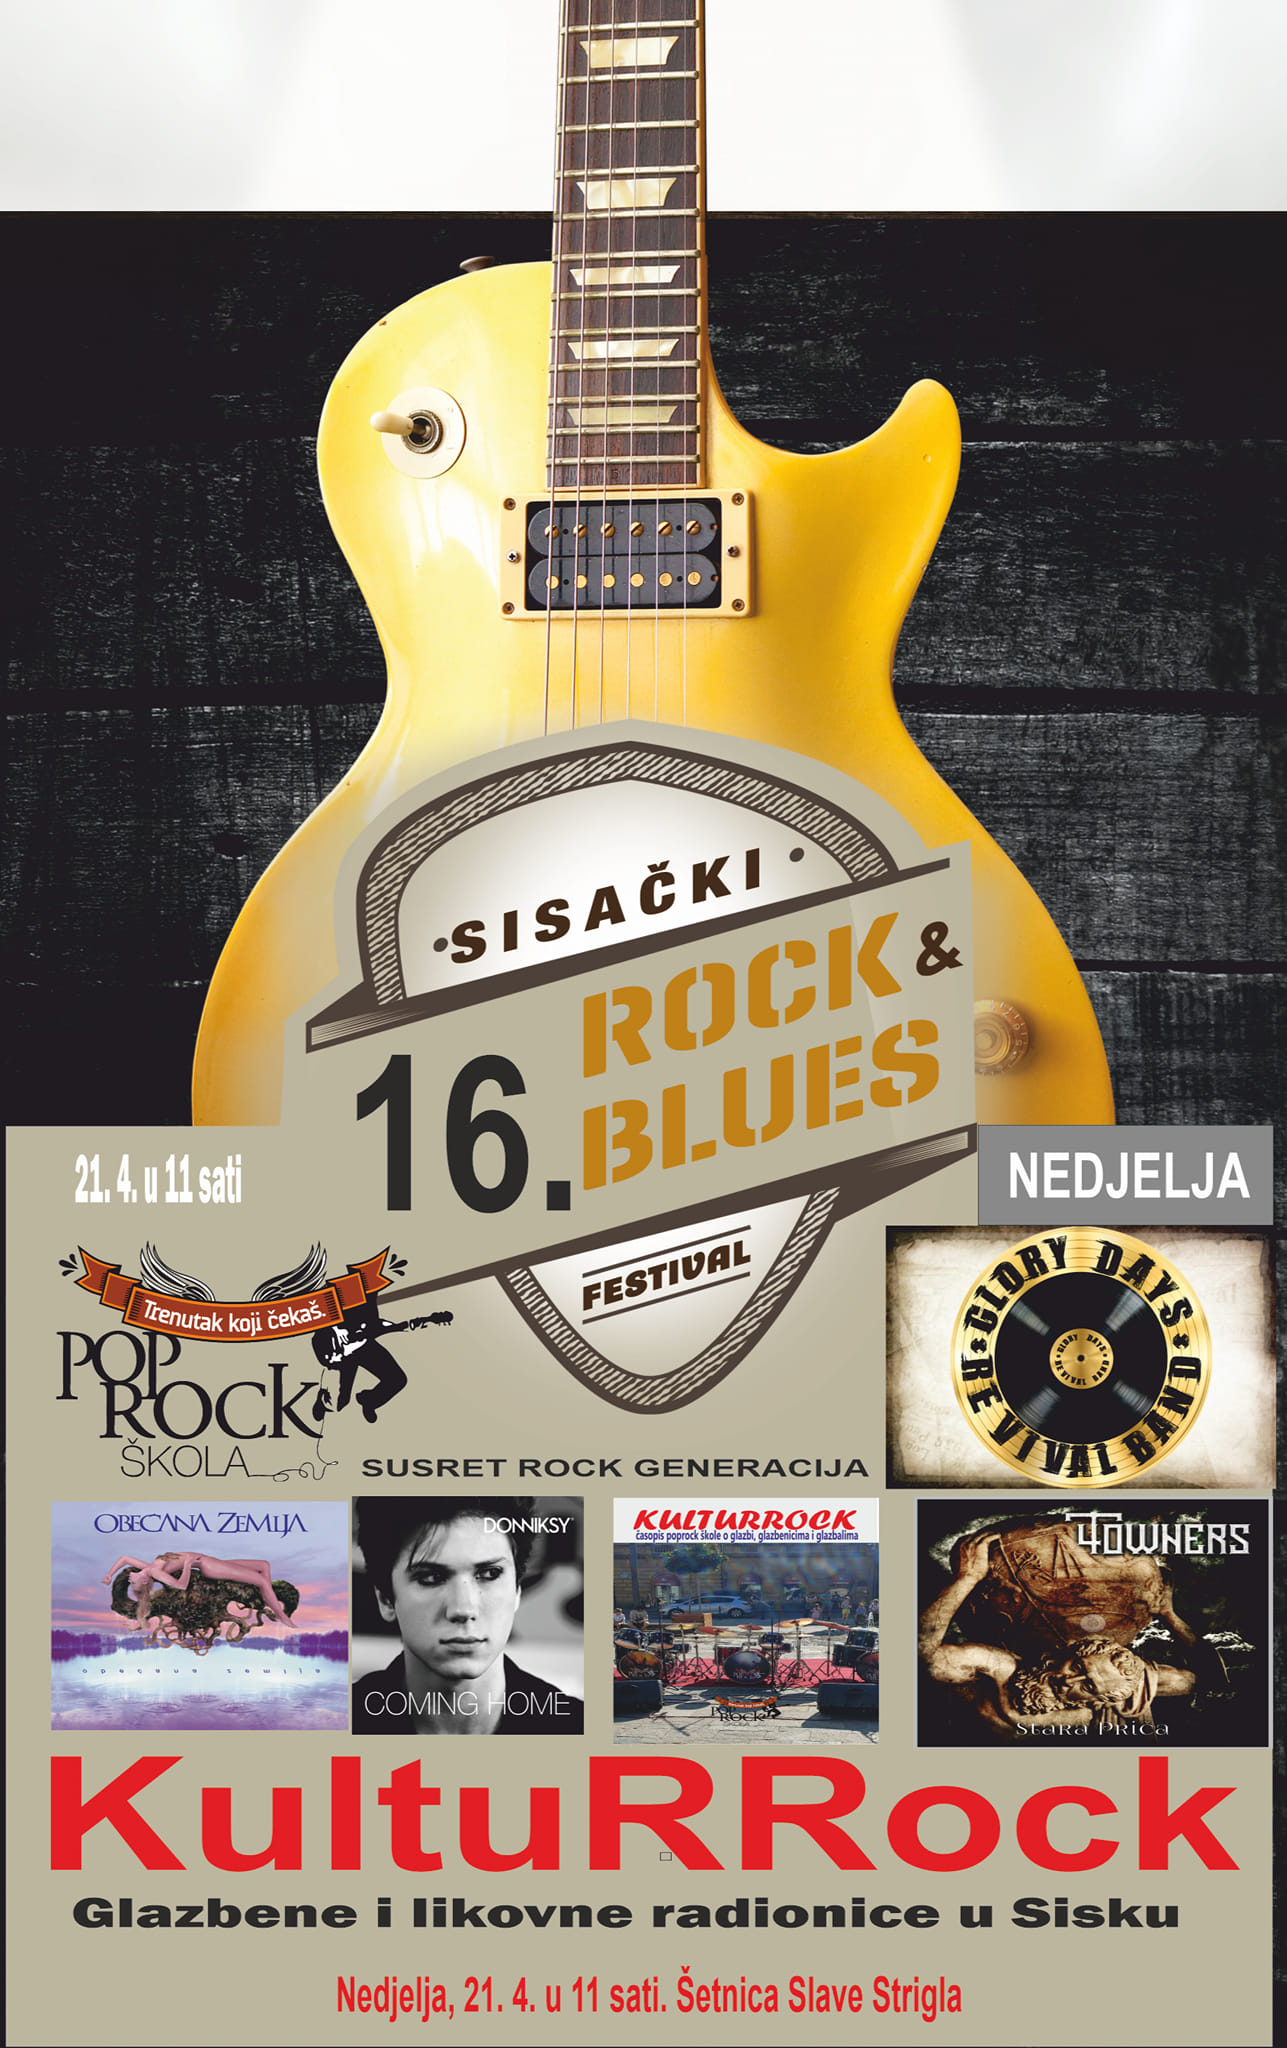 You are currently viewing Rock & blues festival u Sisku